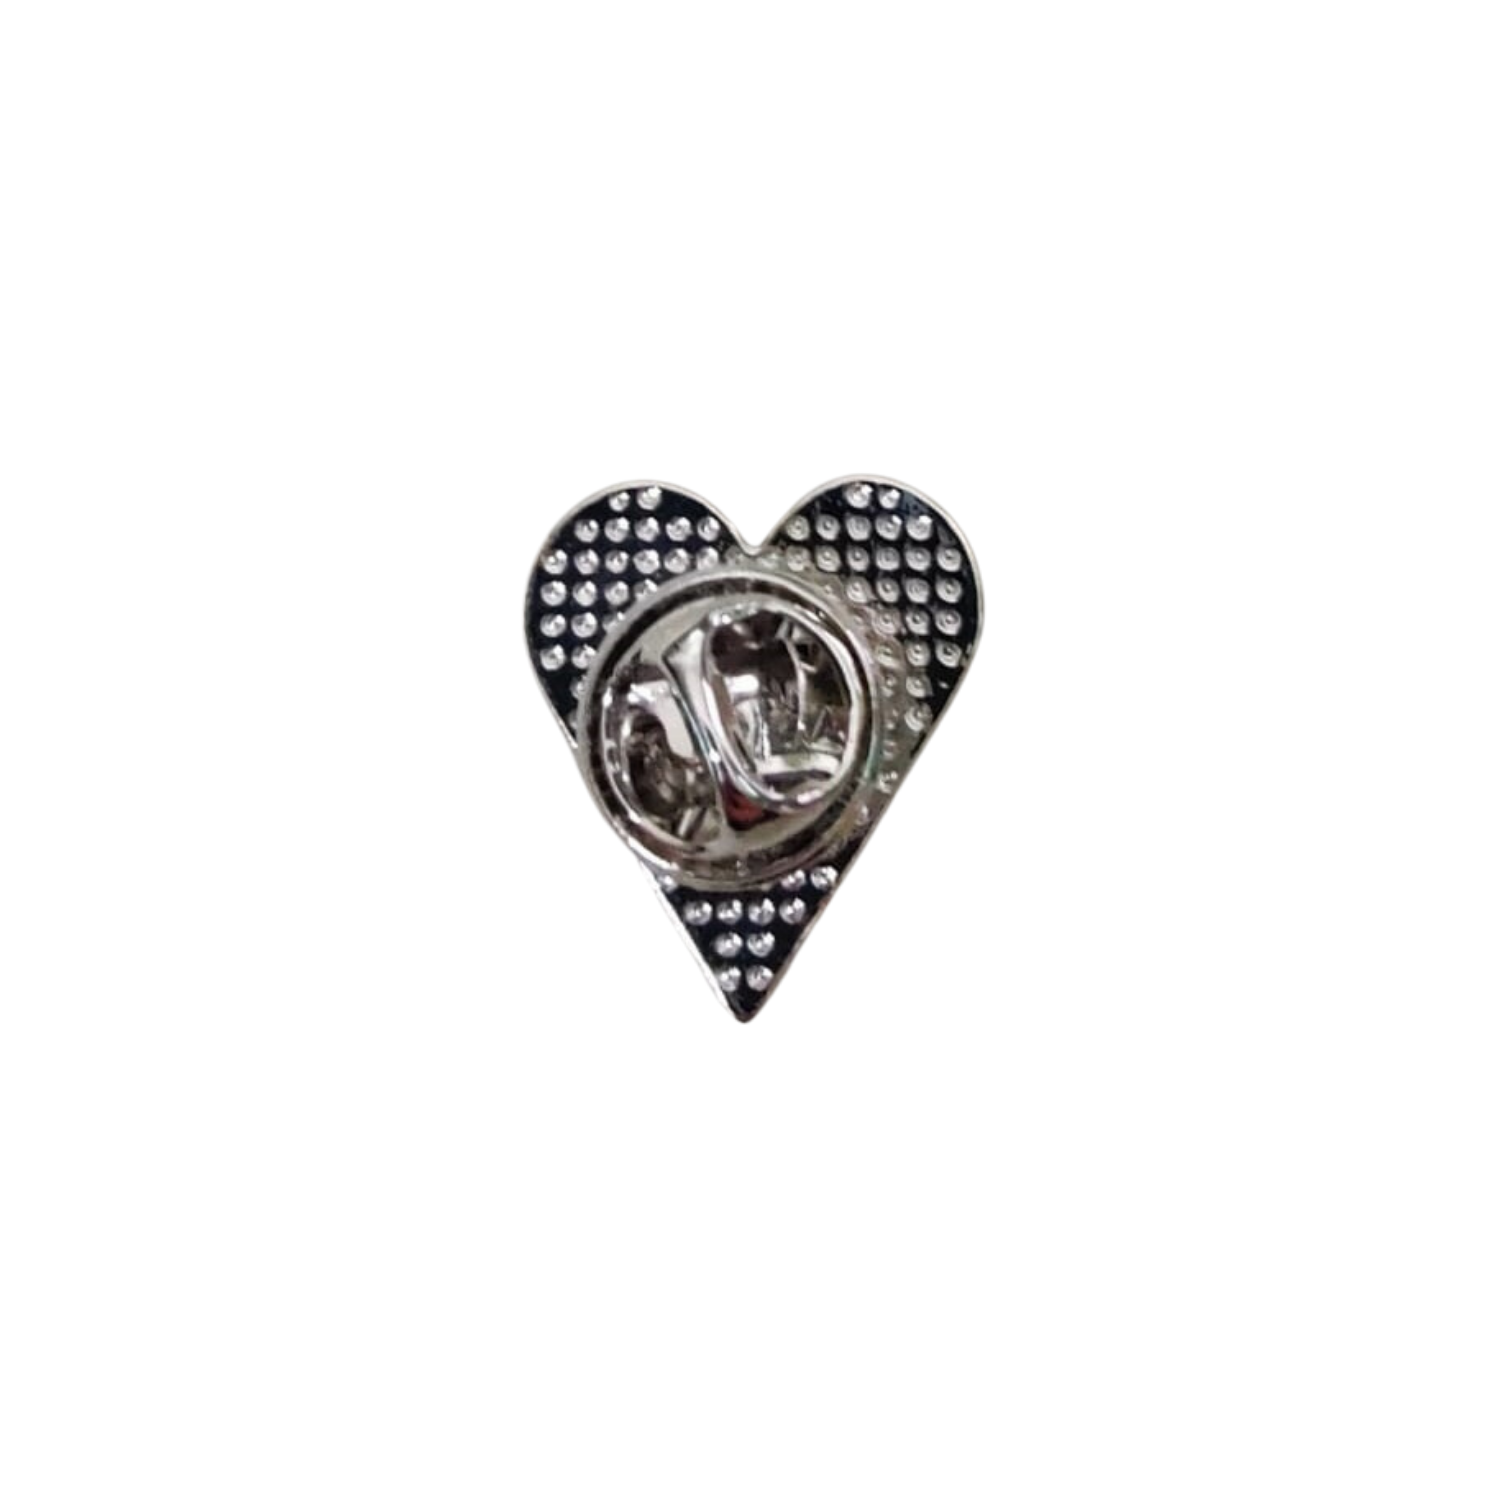 Back Red Heart Shaped Lapel Pin